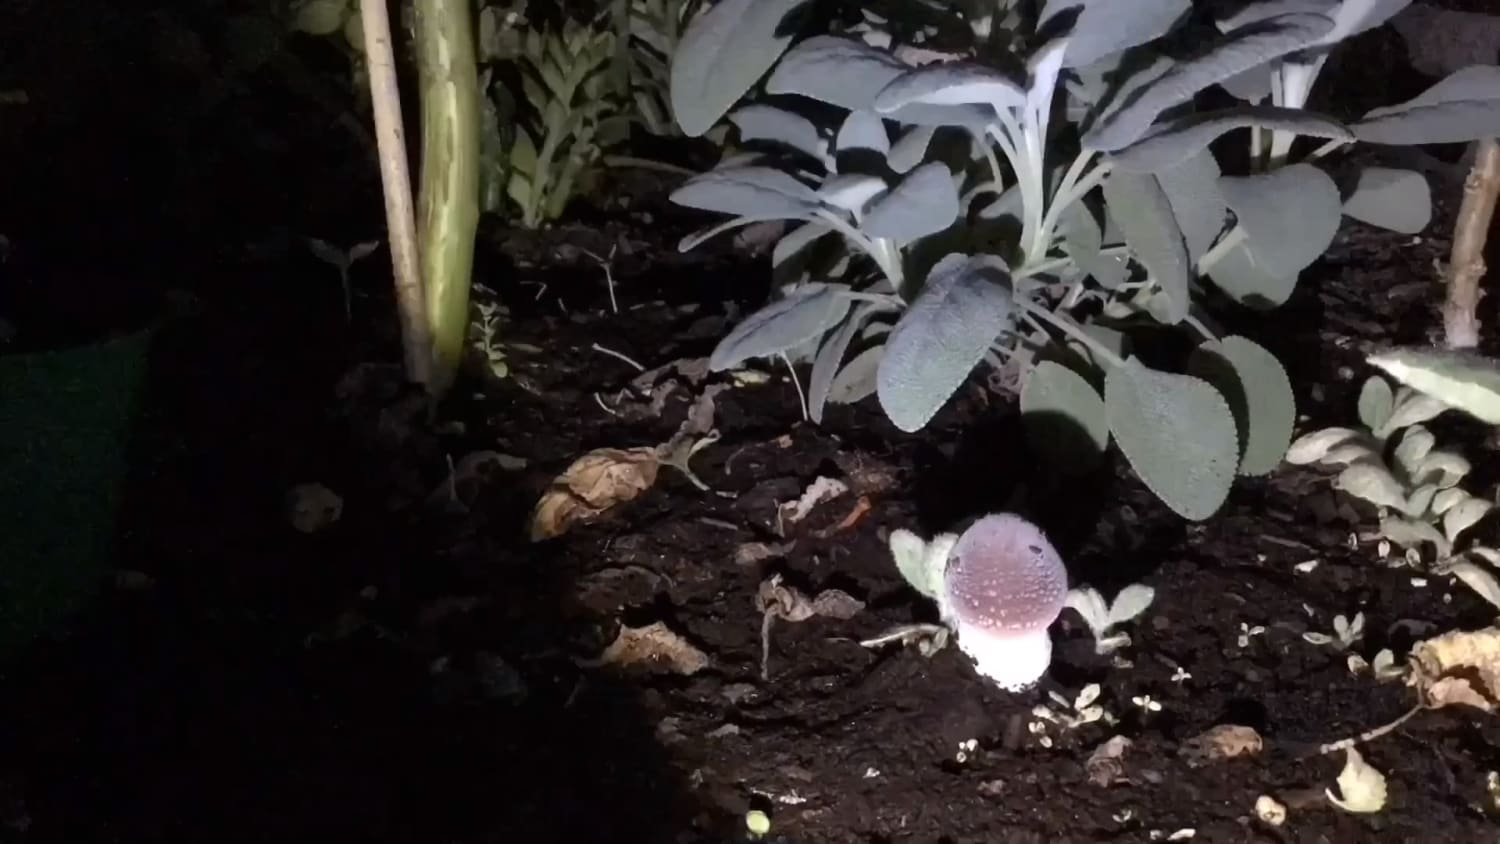 72 hour time lapse of a mushroom growing. Not the best time lapse but it is beautiful